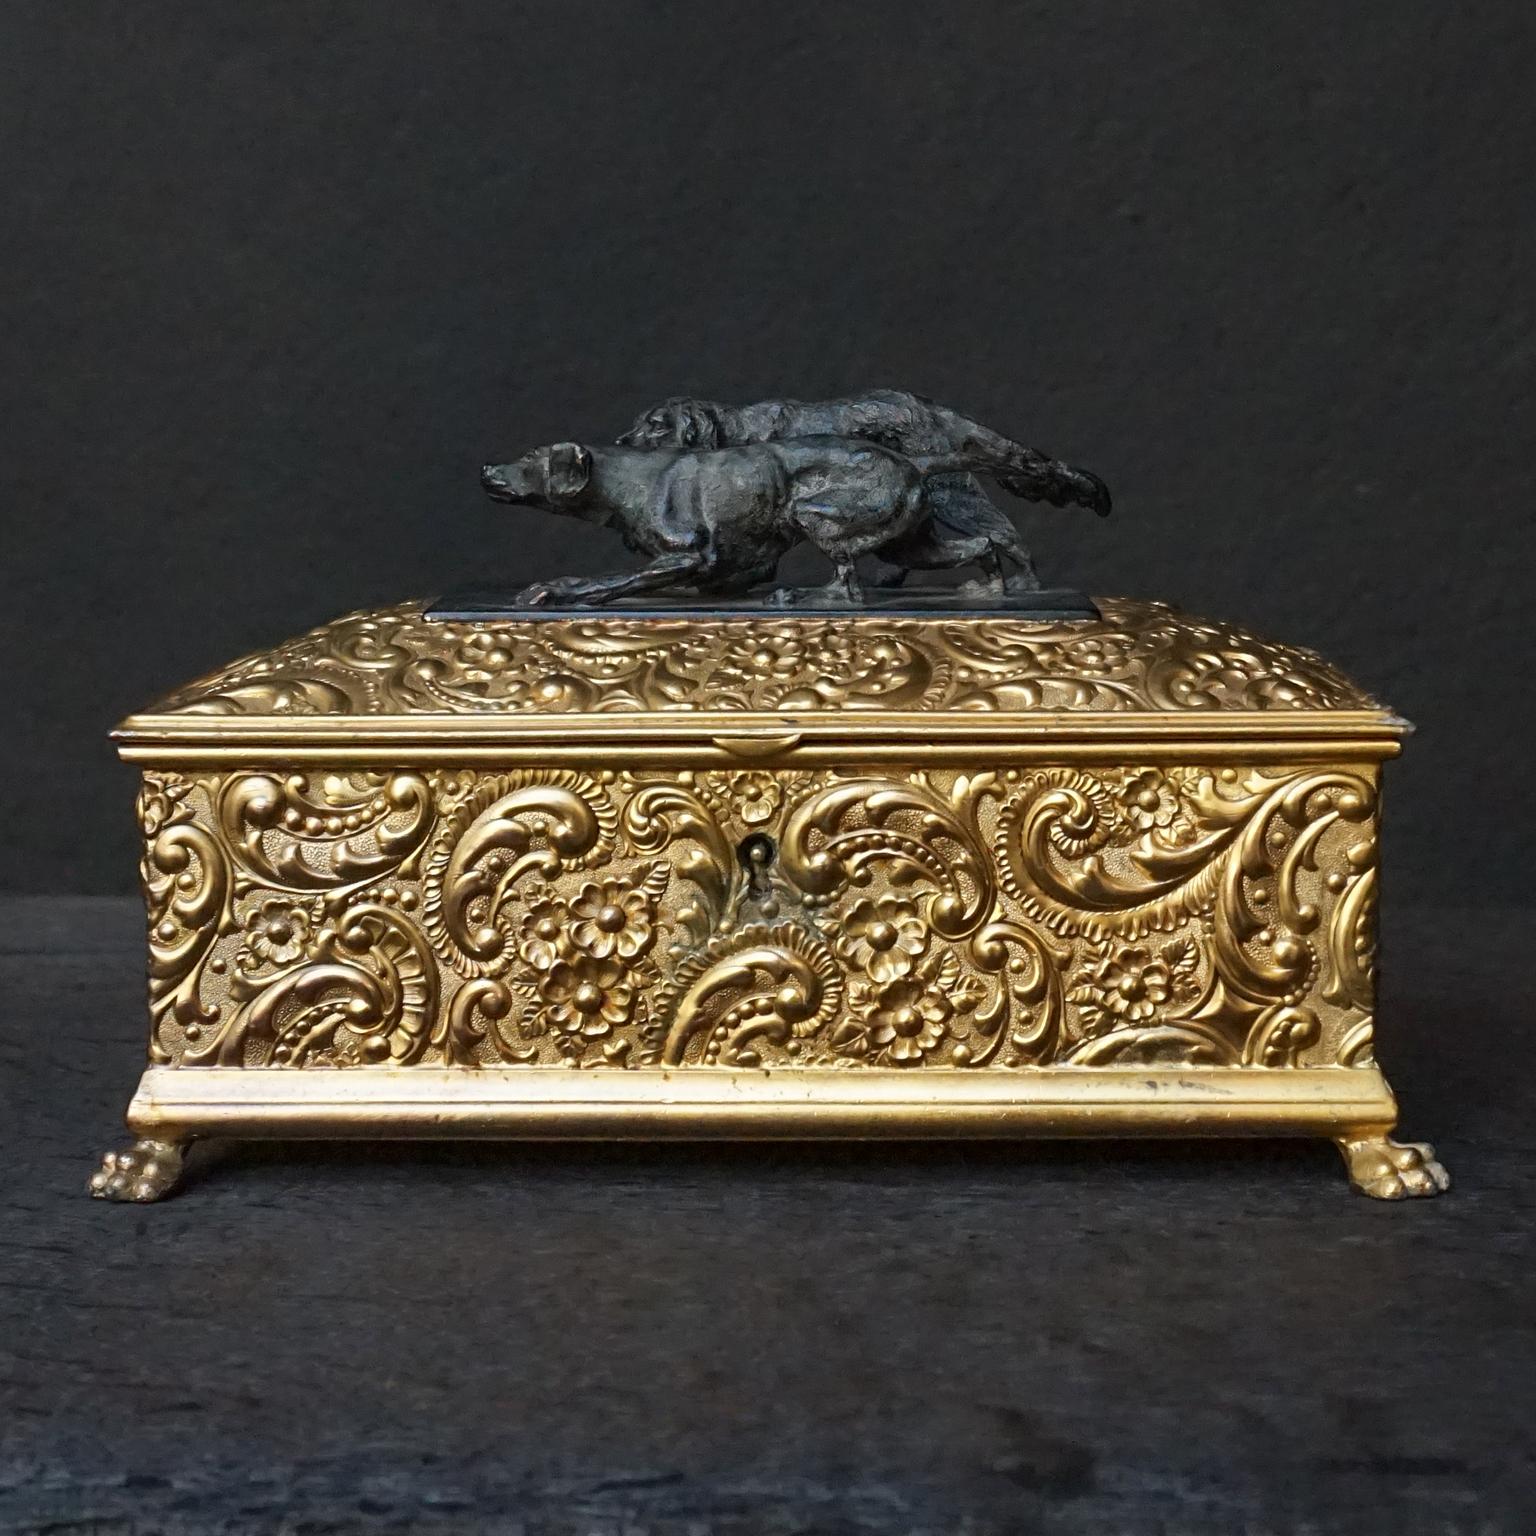 Highly detailed quadruple plated silver cigar humidor, with repoussé floral motif.
Rectangular heavy box with two figural hunting dogs in bronze on the hinged lid. 
Inside two compartments separated by a small middle compartment.

Made by Wilcox